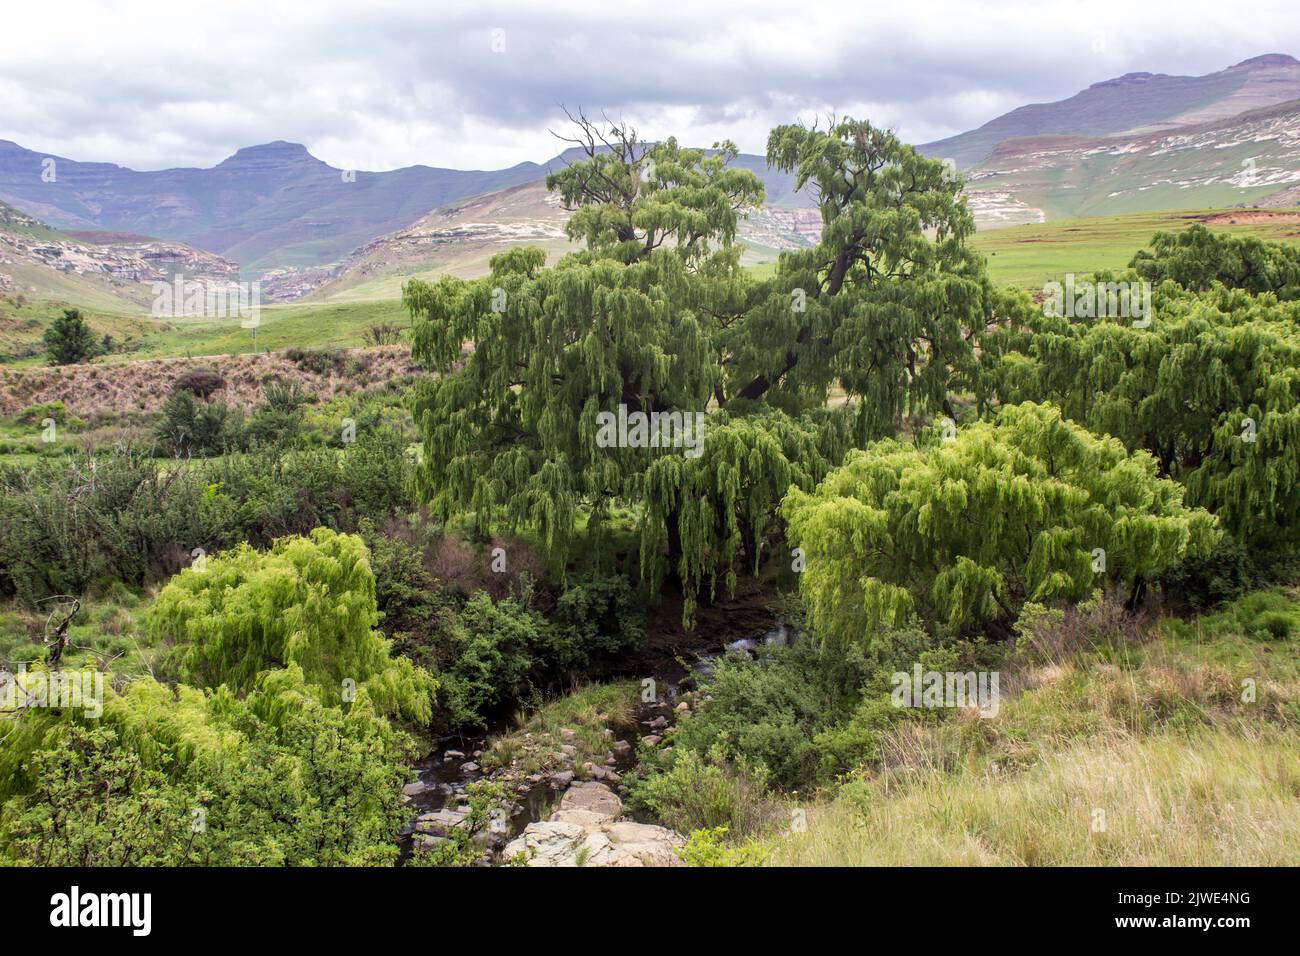 A Weeping Willow, Salix Babylinica, in the Drakensberg Mountains of South Africa, with a gathering storm in the background Stock Photo